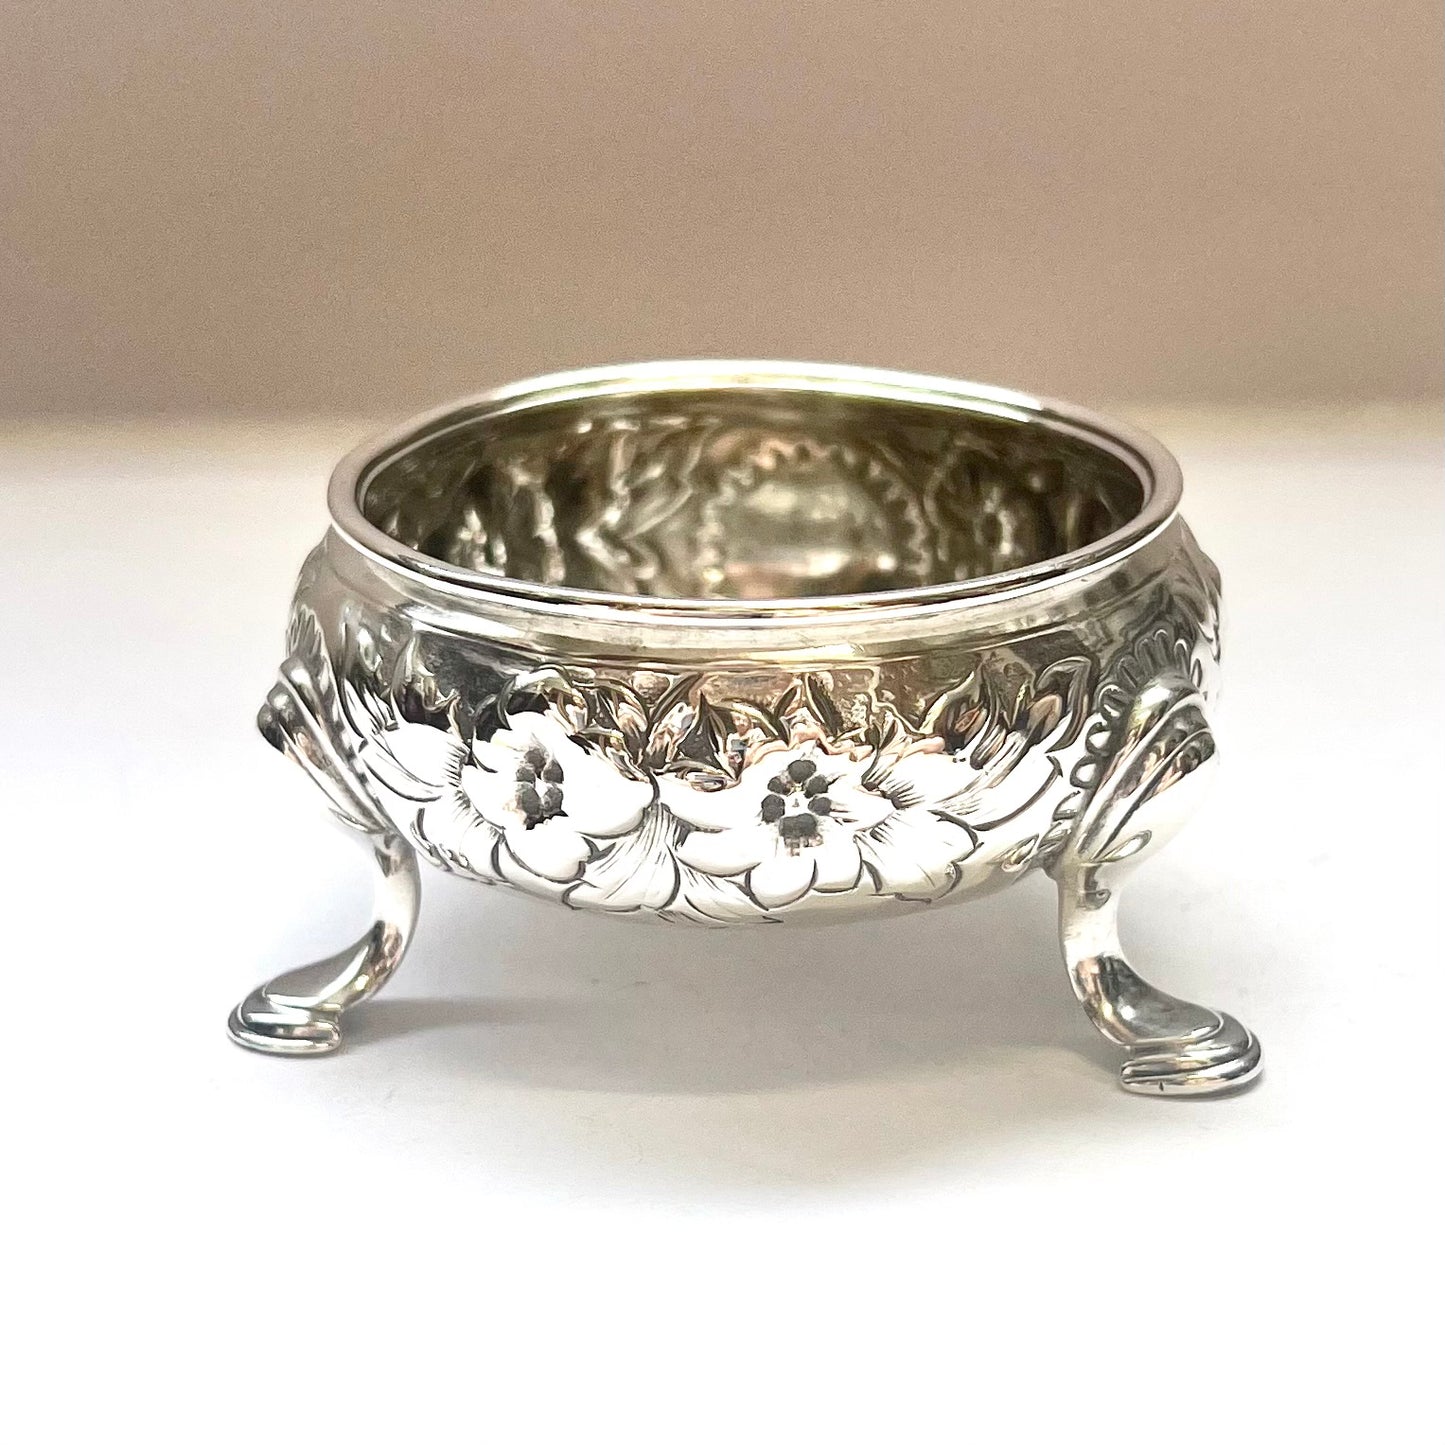 Rare George II sterling silver salt cellar, with marks for London, 1751, David Hennell I.